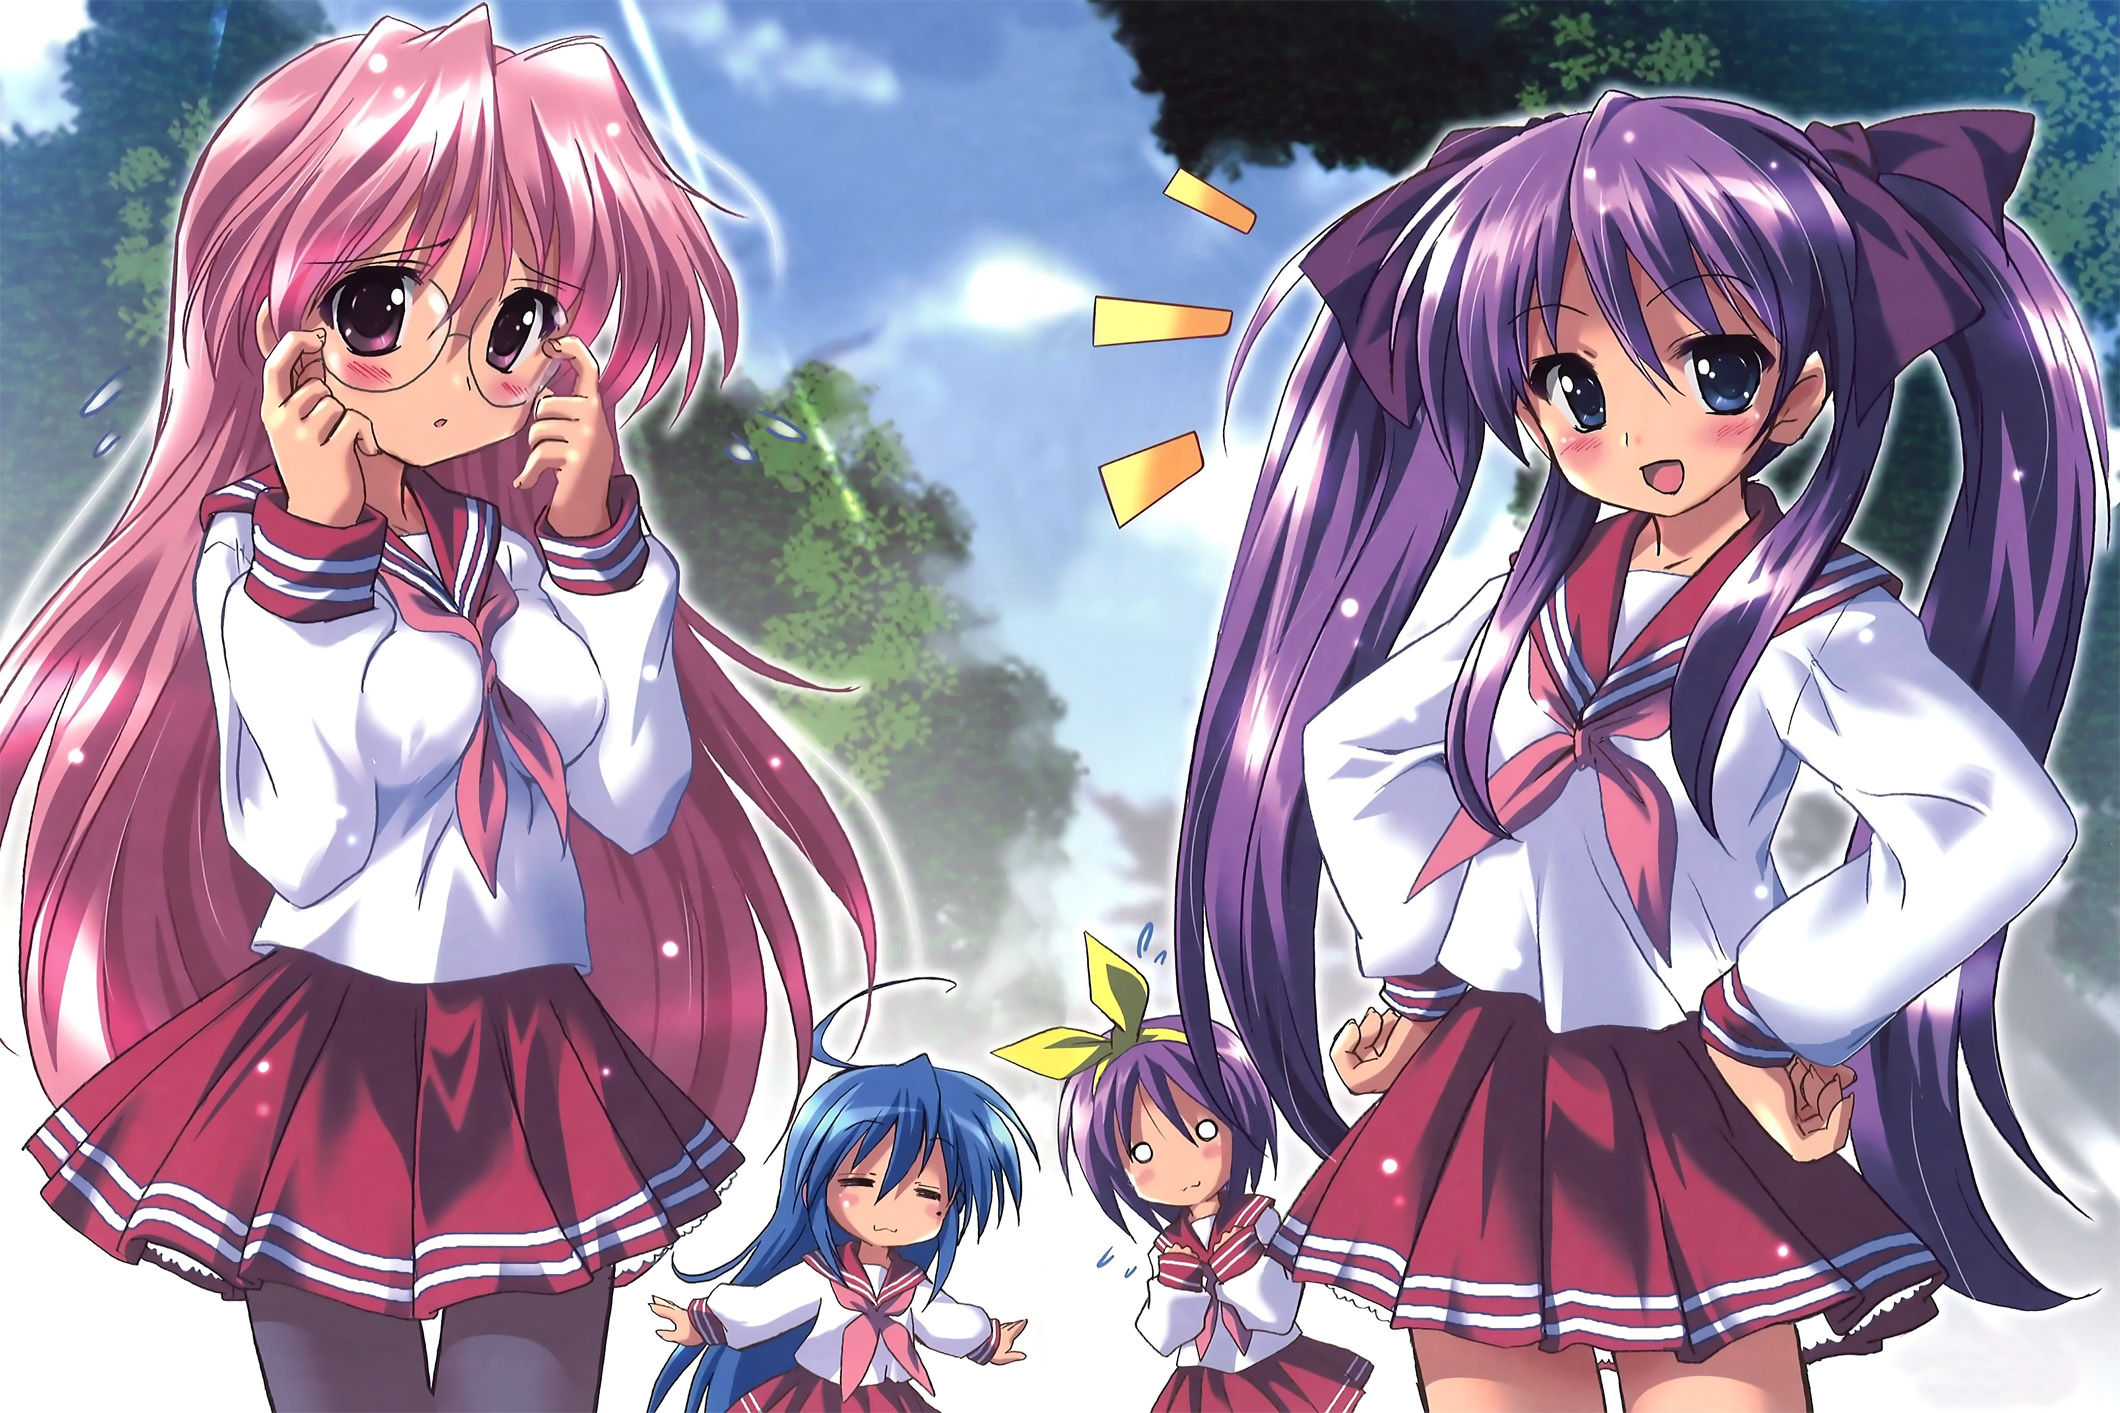 5. "Kagami Hiiragi" from Lucky Star - wide 3